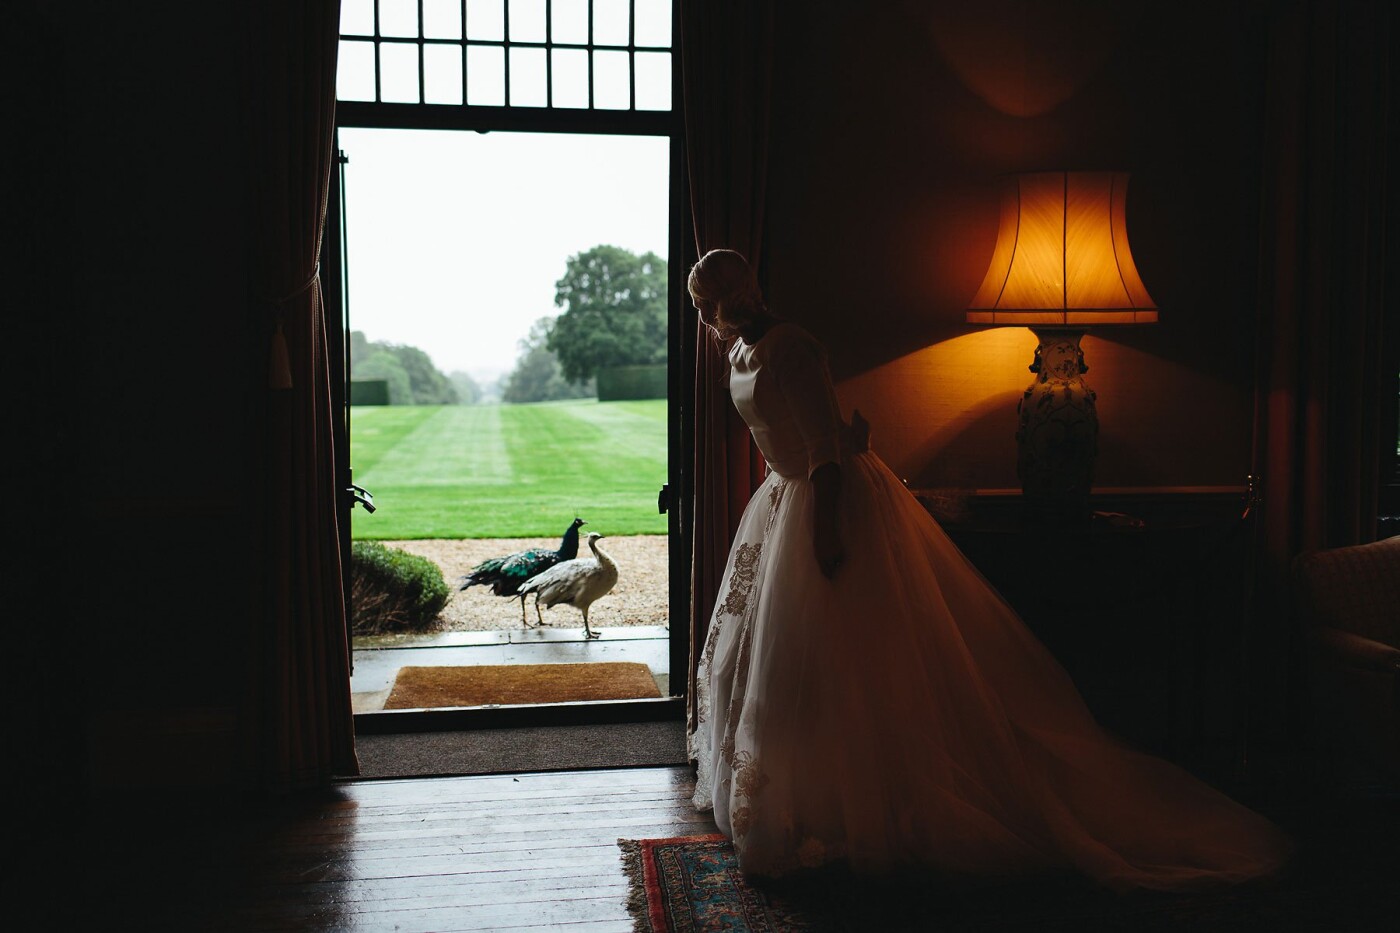 Hampden House is set in the heart of the stunning, wooded Chiltern Hills in Buckinghamshire, UK. It’s a beautiful and charming location for a wedding day. This was taken during the wedding breakfast when two peacocks decided to check out the wedding themselves.